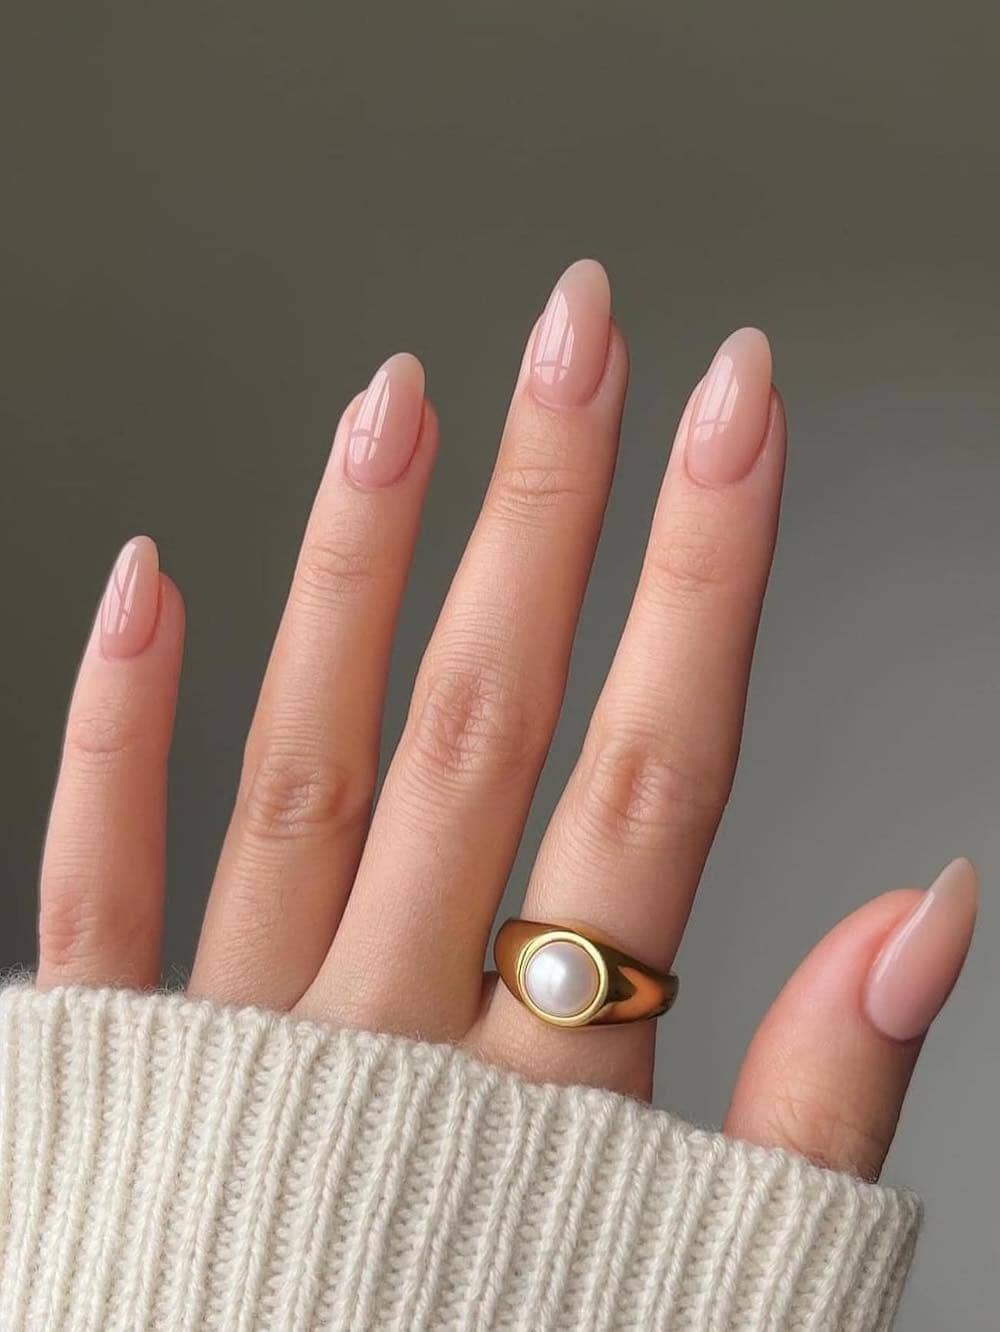 A hand with short nude almond nails